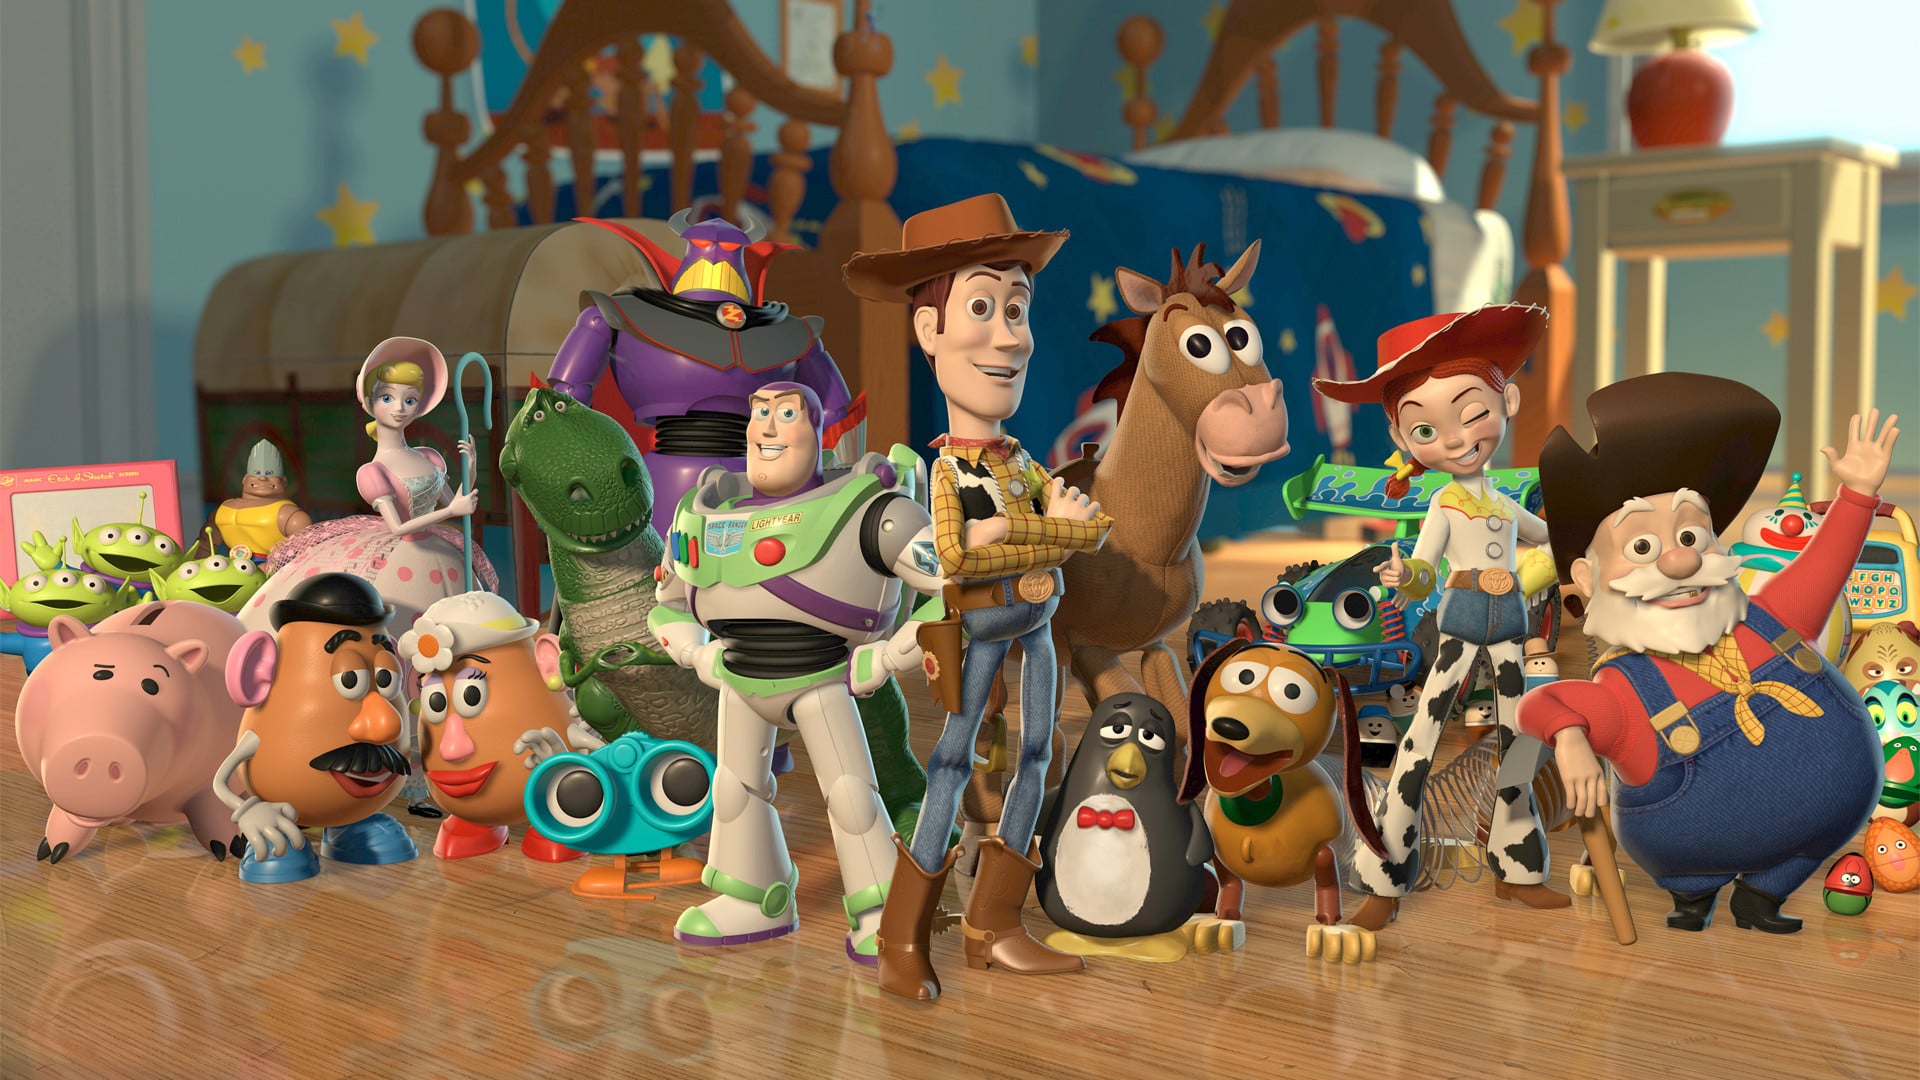 Toy Story 2 - 25th Anniversary (1999)